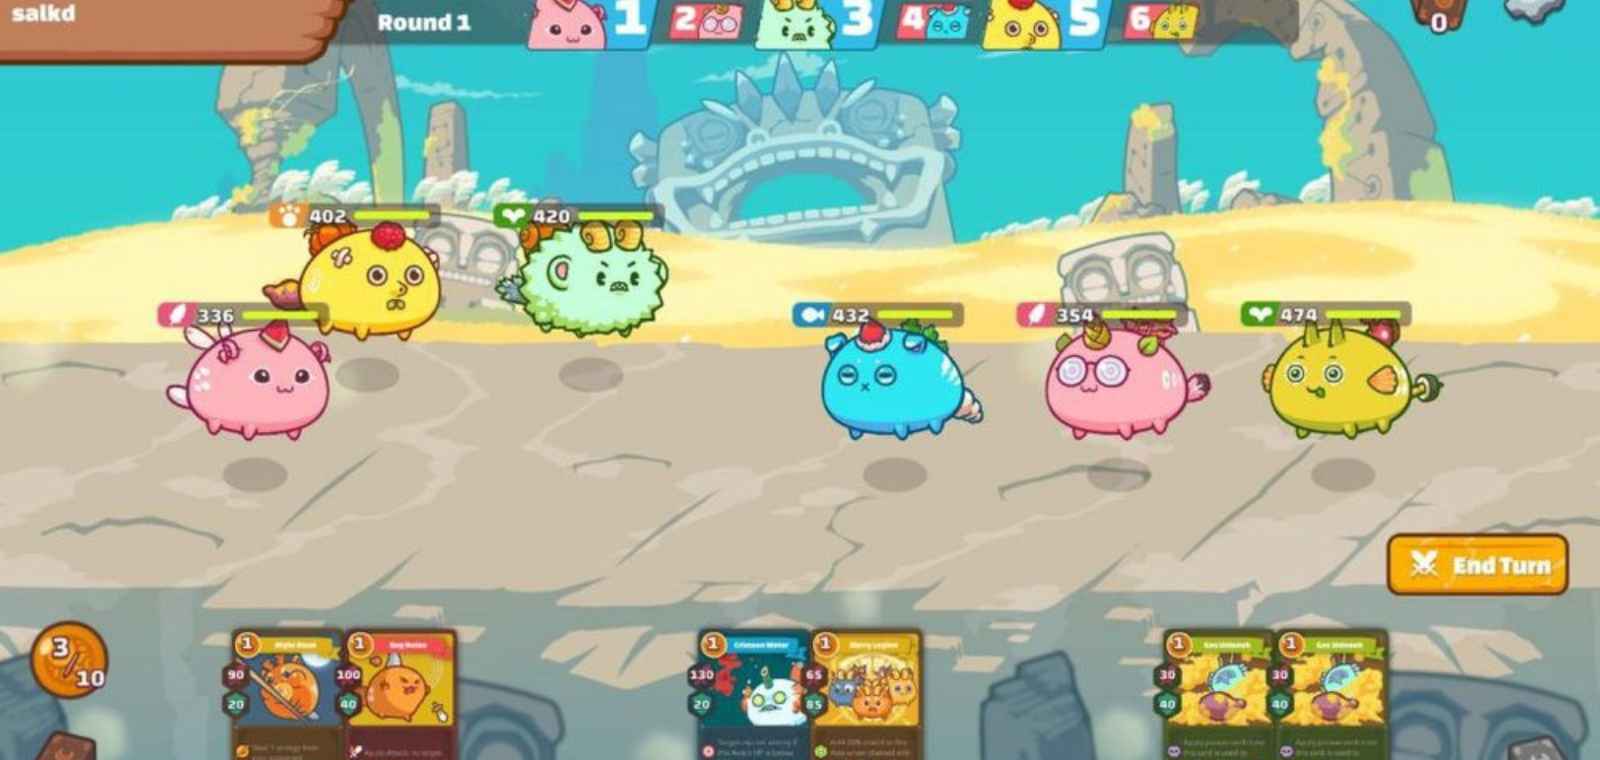 Axie Infinity Clone: To Build A Online Pokemon-themed Game Like Axie Infinity On Ethereum blockchain that extends outside the Metaverse